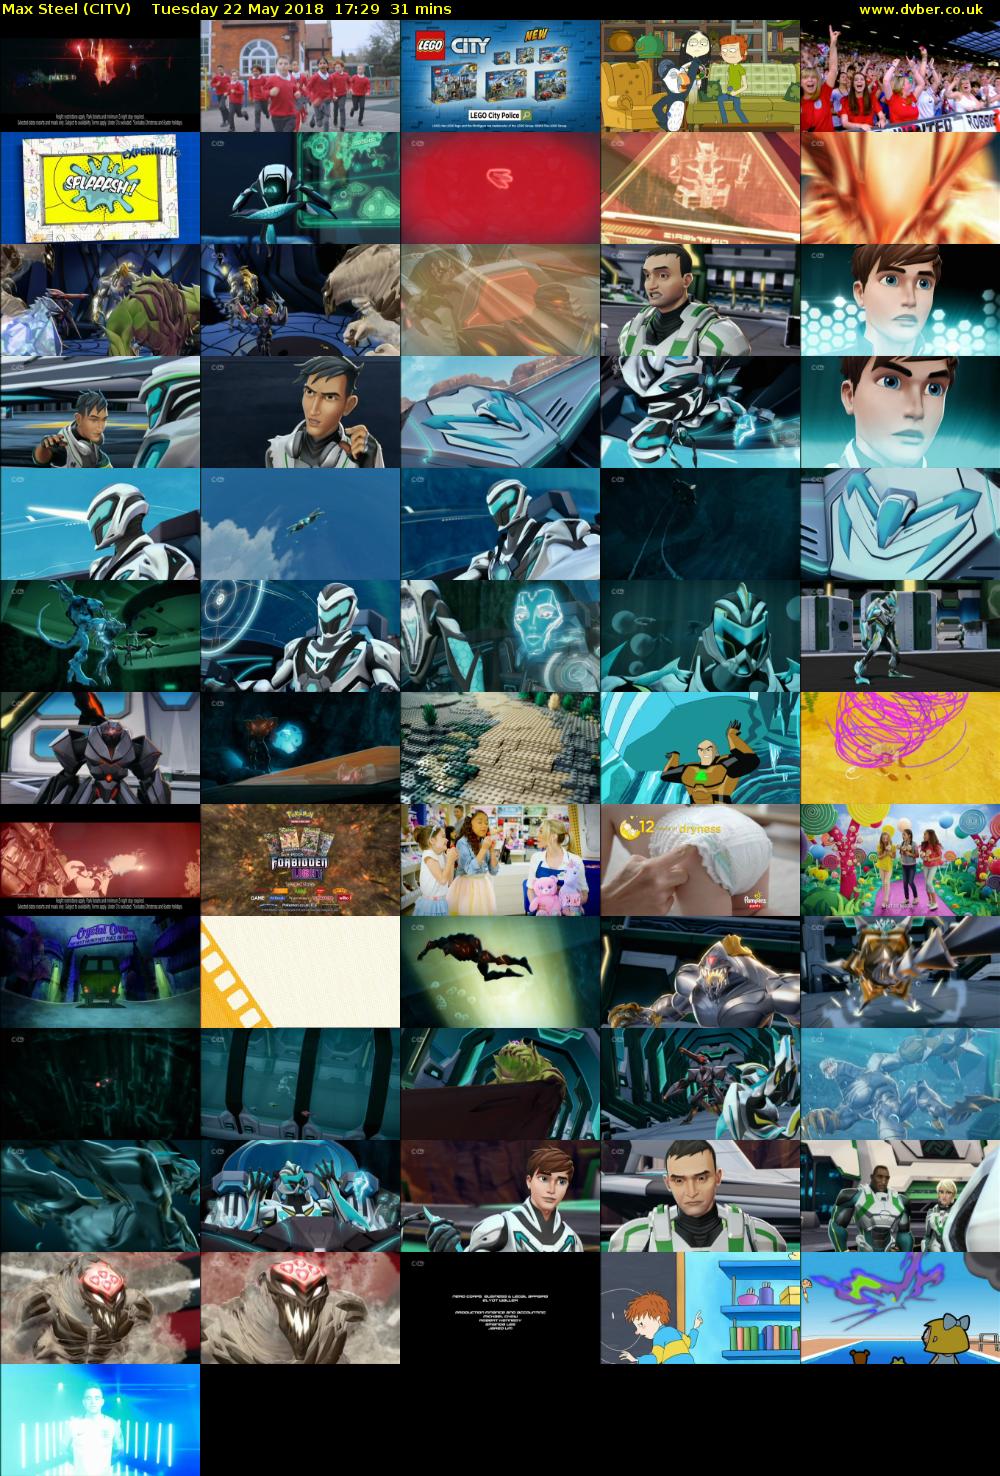 Max Steel (CITV) Tuesday 22 May 2018 17:29 - 18:00